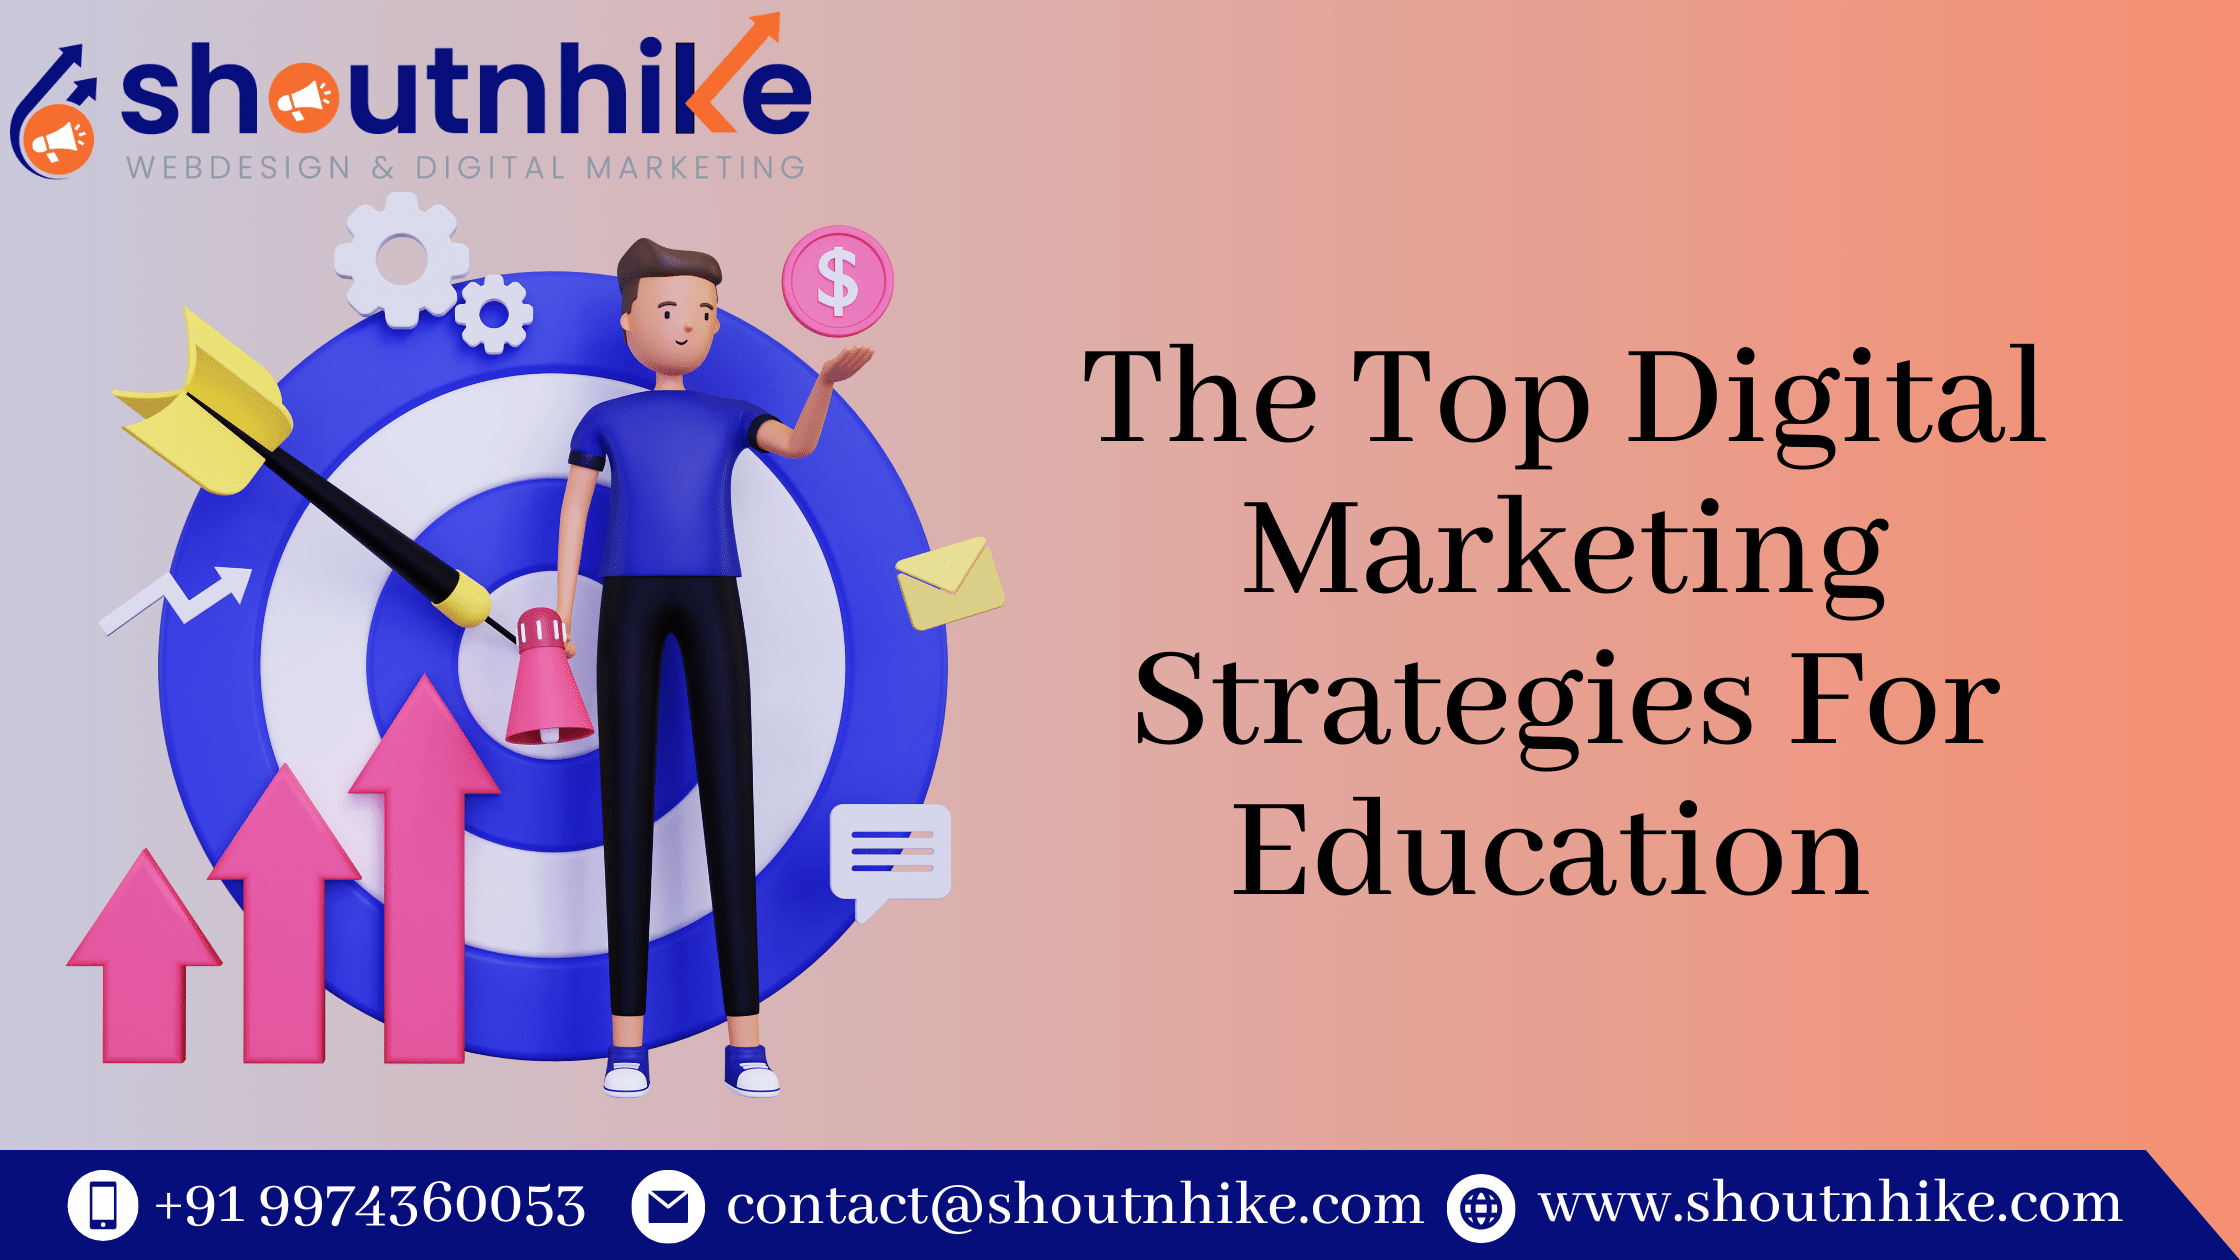 The Top Digital Marketing Strategies For Education